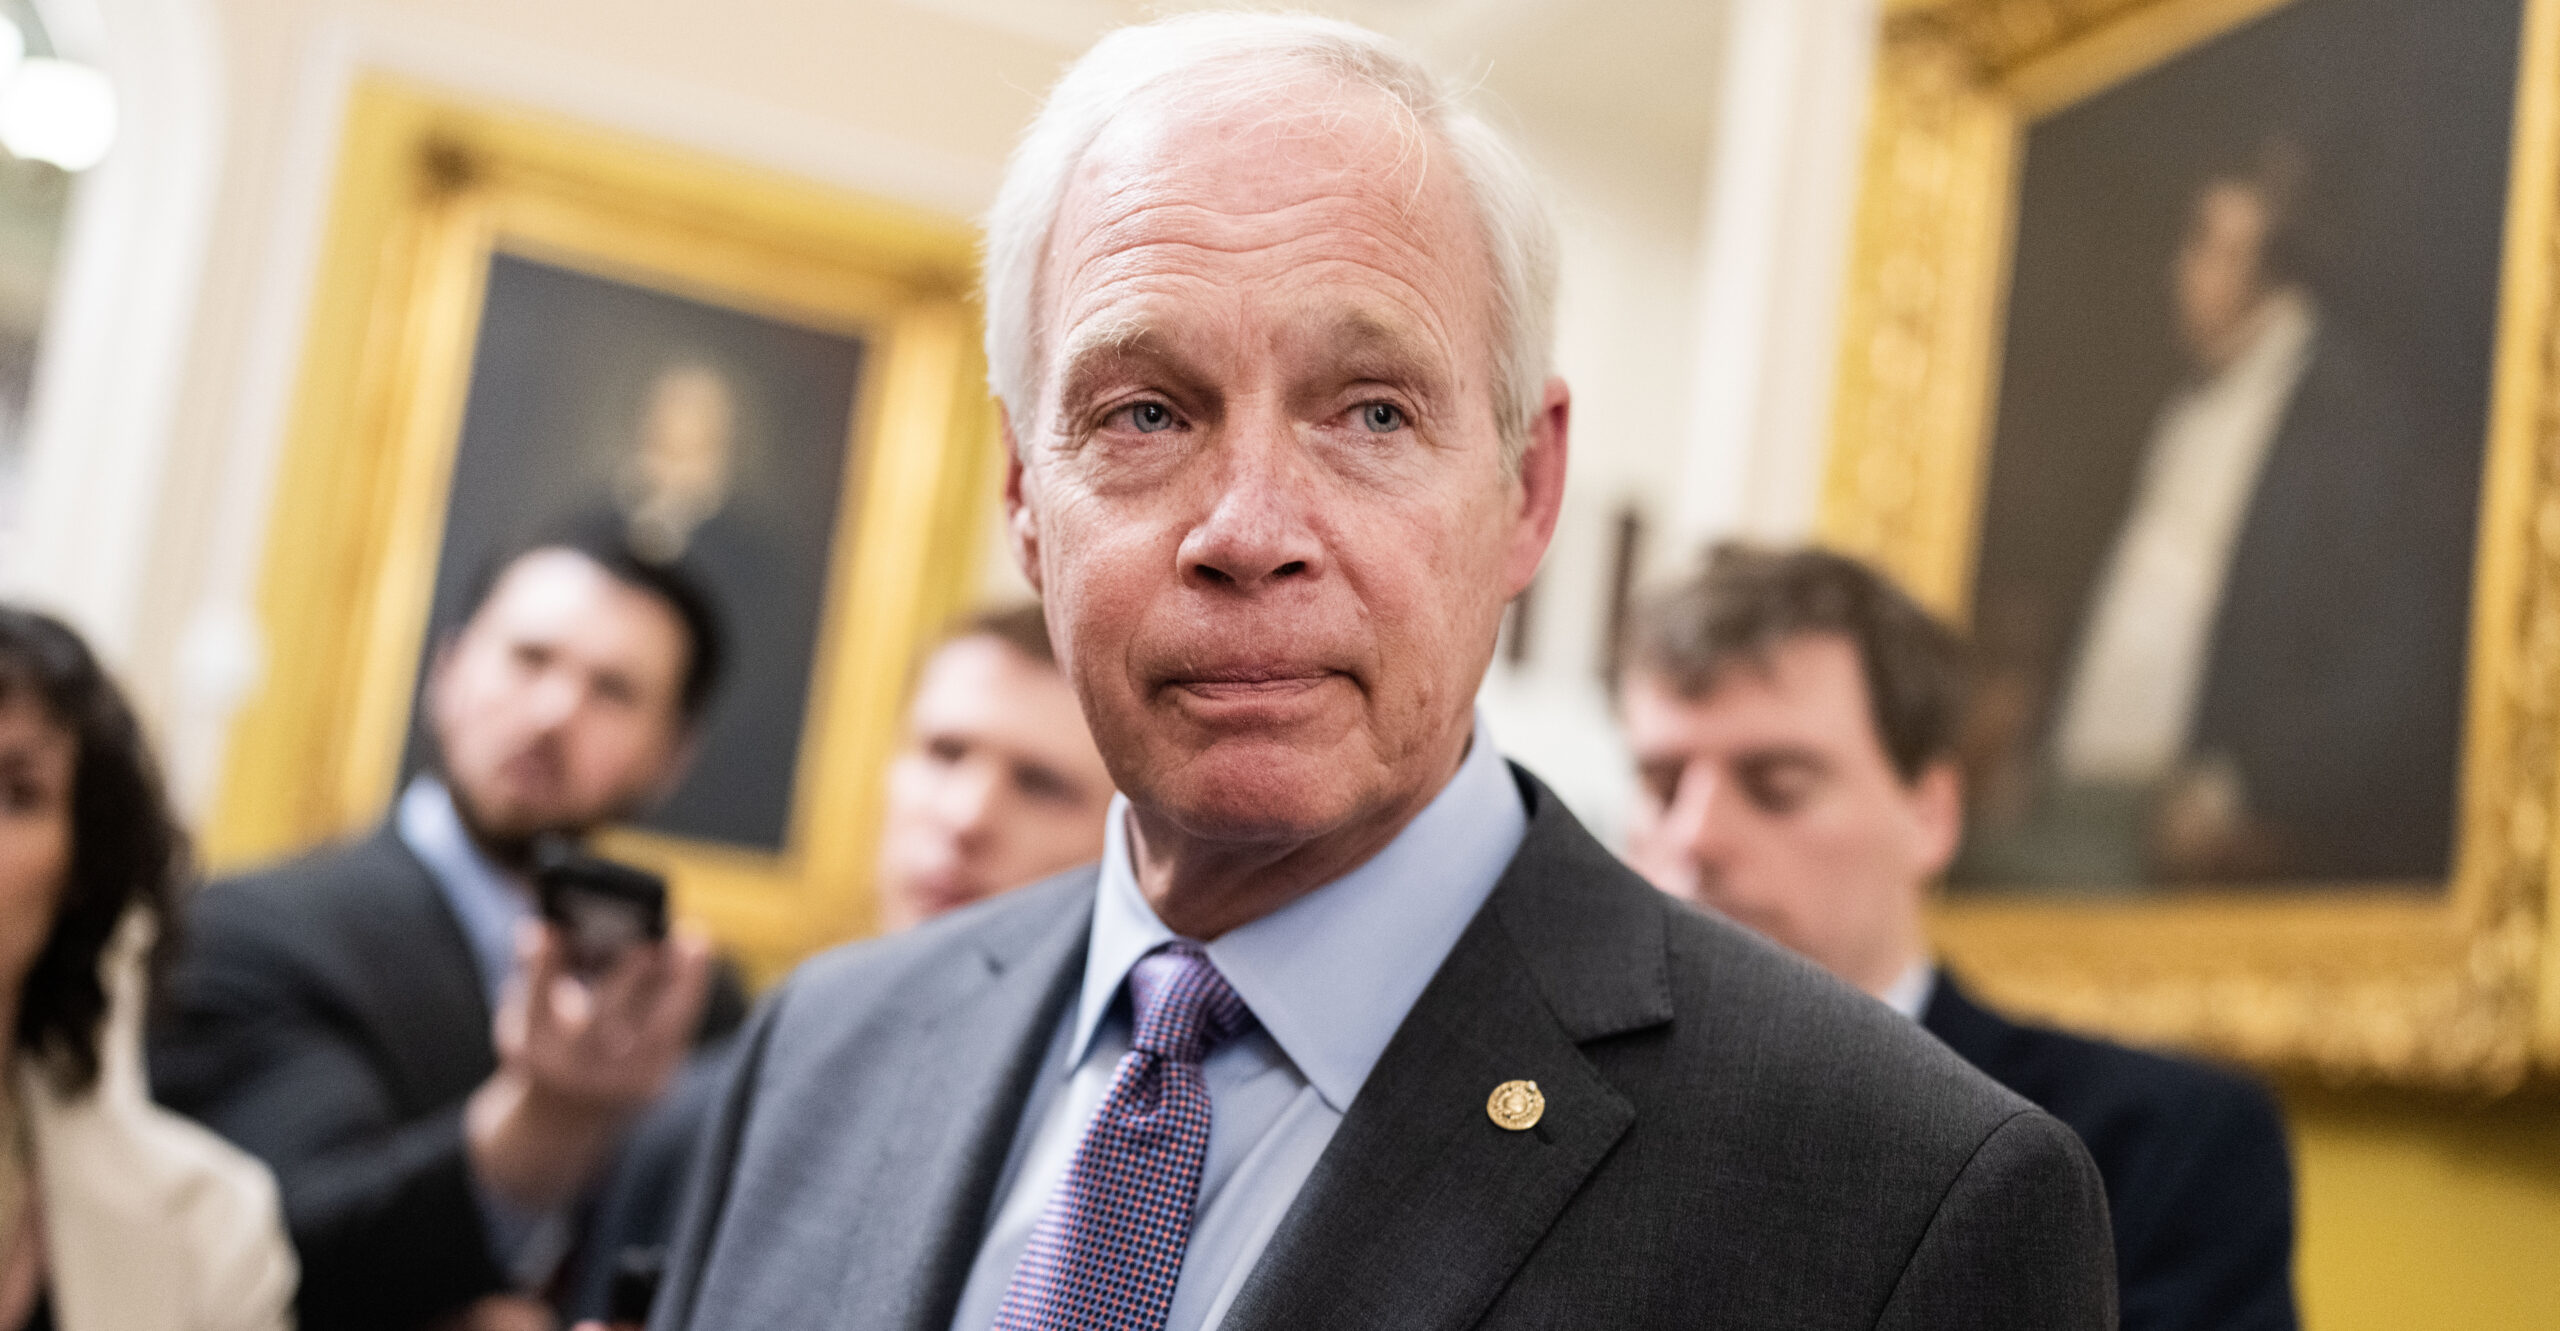 Sen. Ron Johnson, Health Experts Allege Cover-Up of COVID-19 Vaccine Dangers